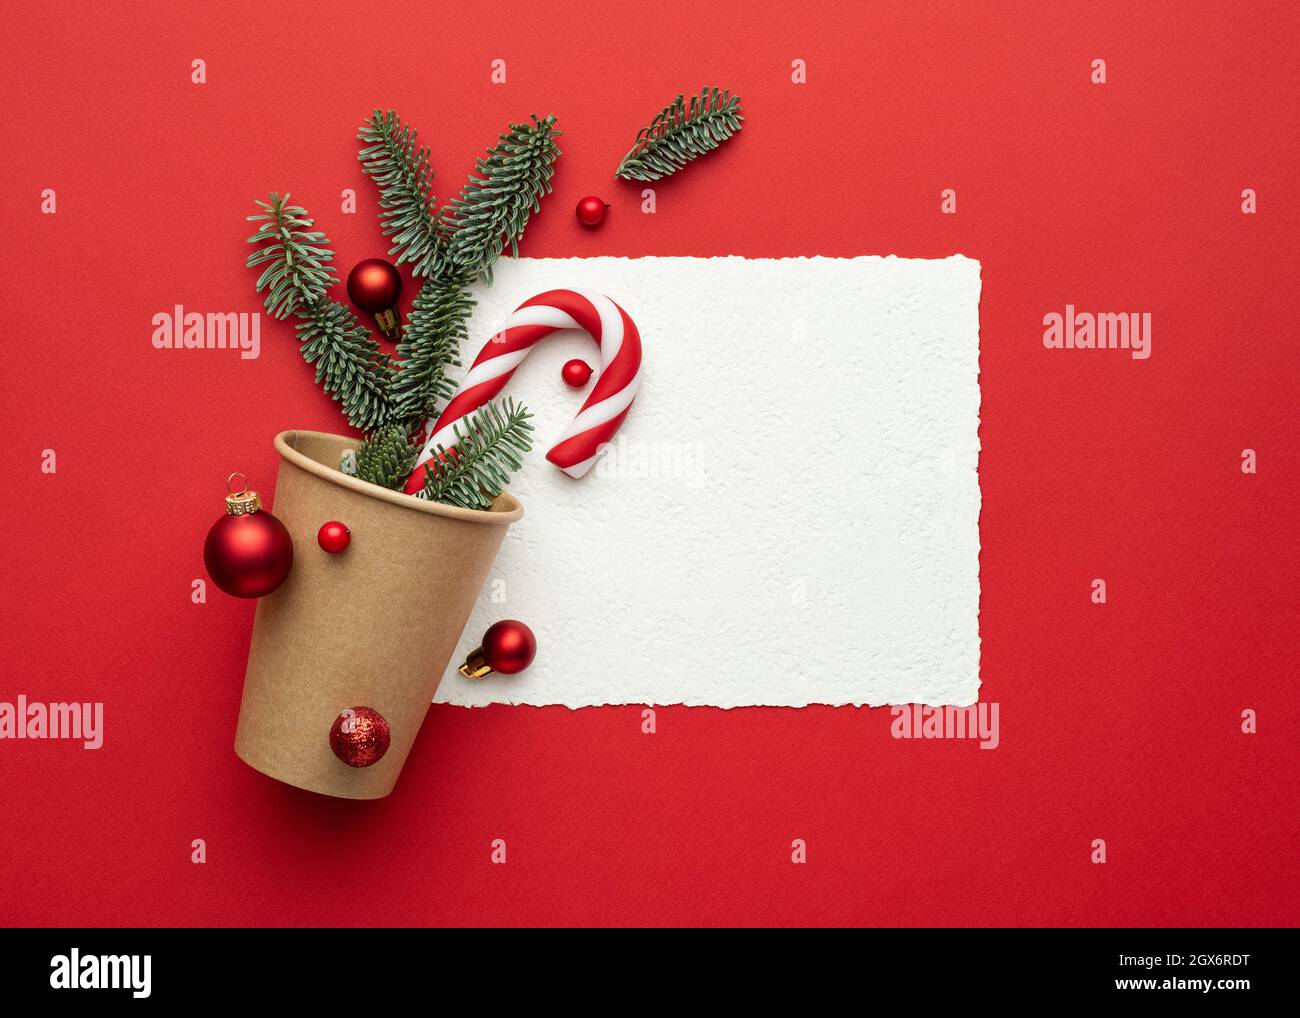 Christmas card with frame on red background and Christmas decorations. Flat lay, top view and copy space for text Stock Photo